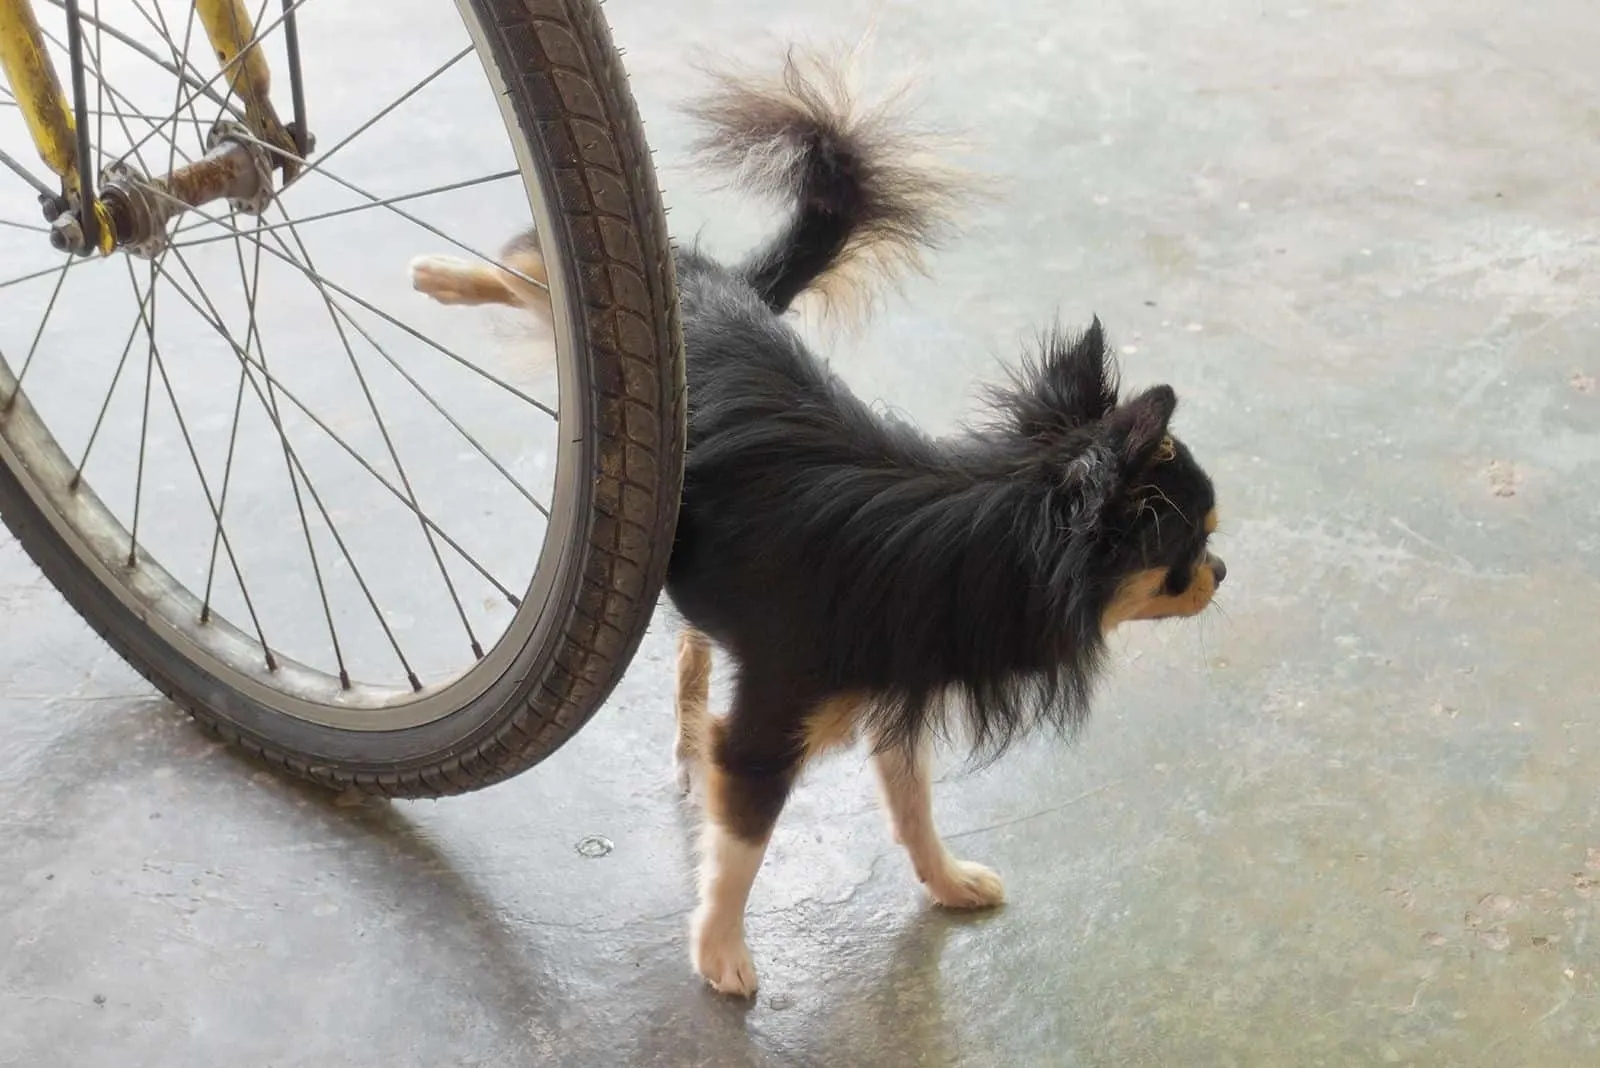 chihuahua peeing on wheel of the bicycle